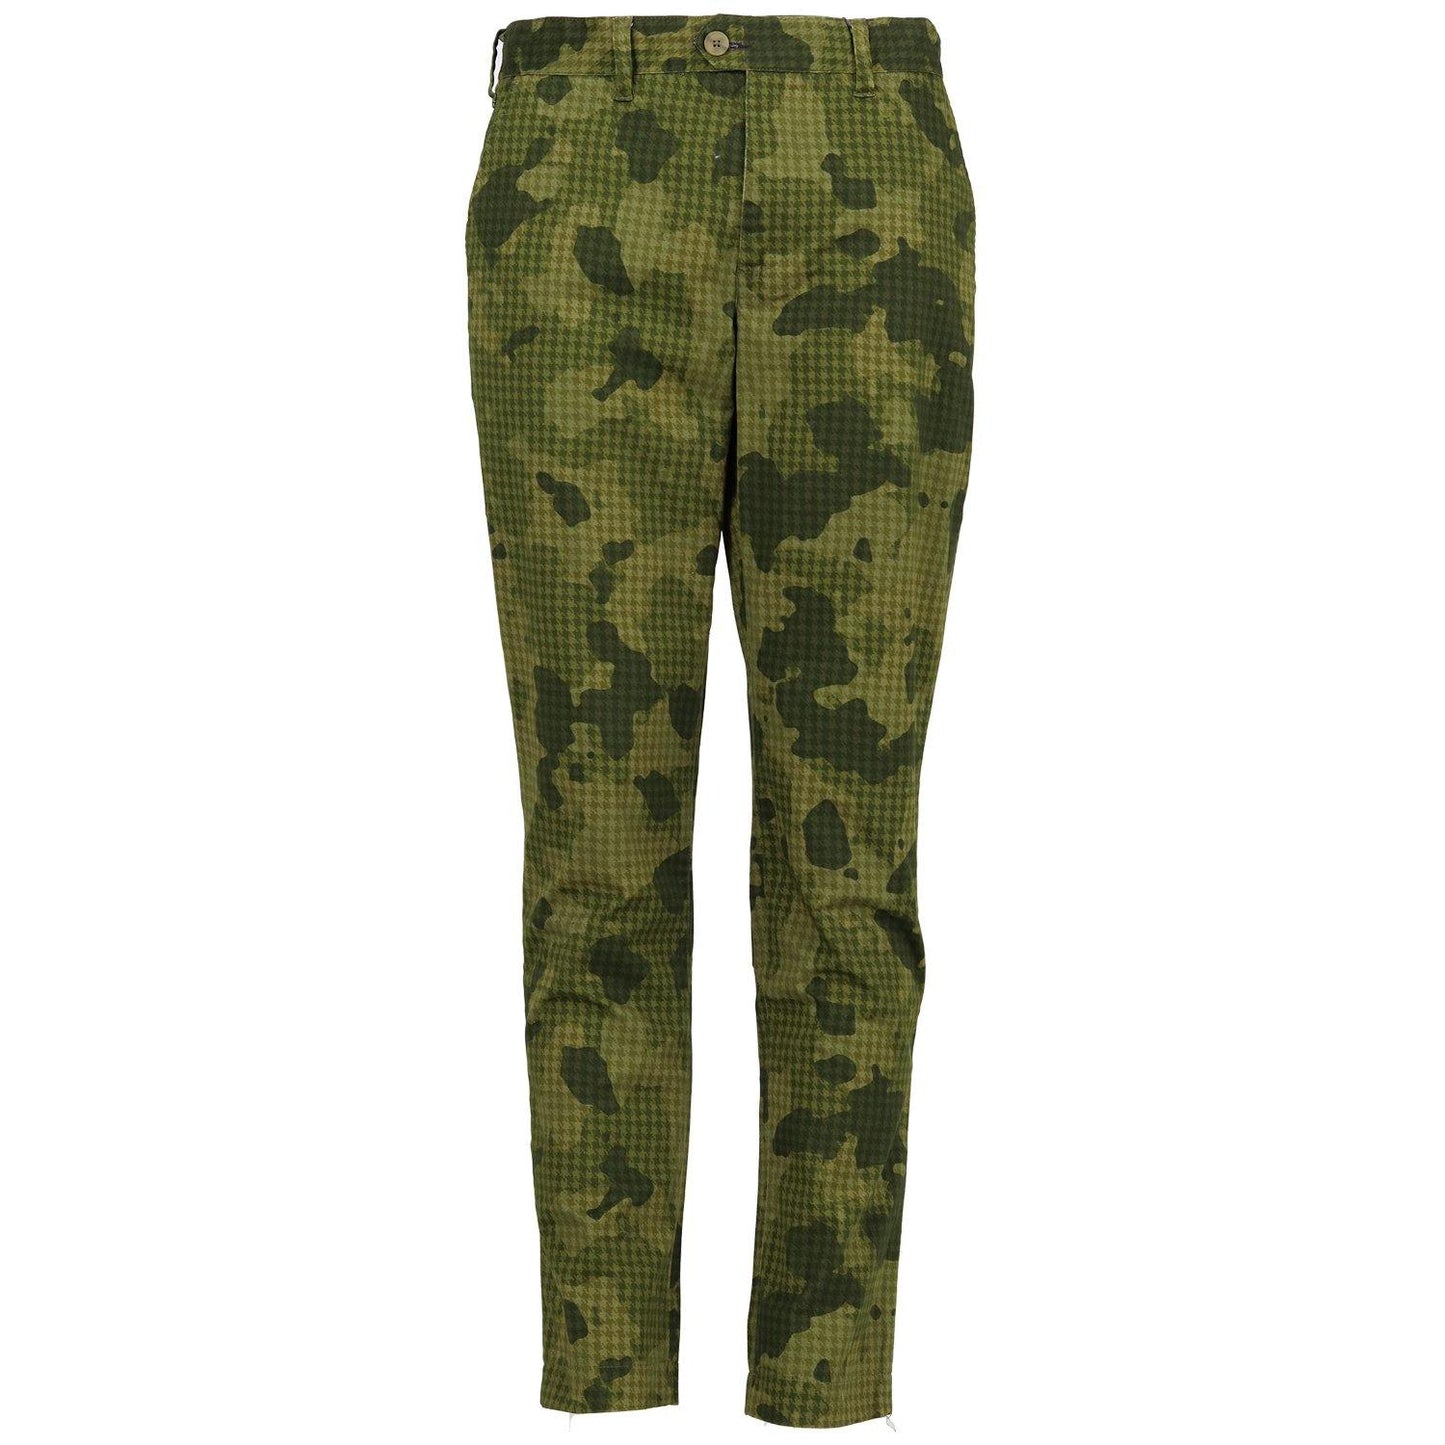 JACK LUX OLIVE CAMO - Lords Of Harlech